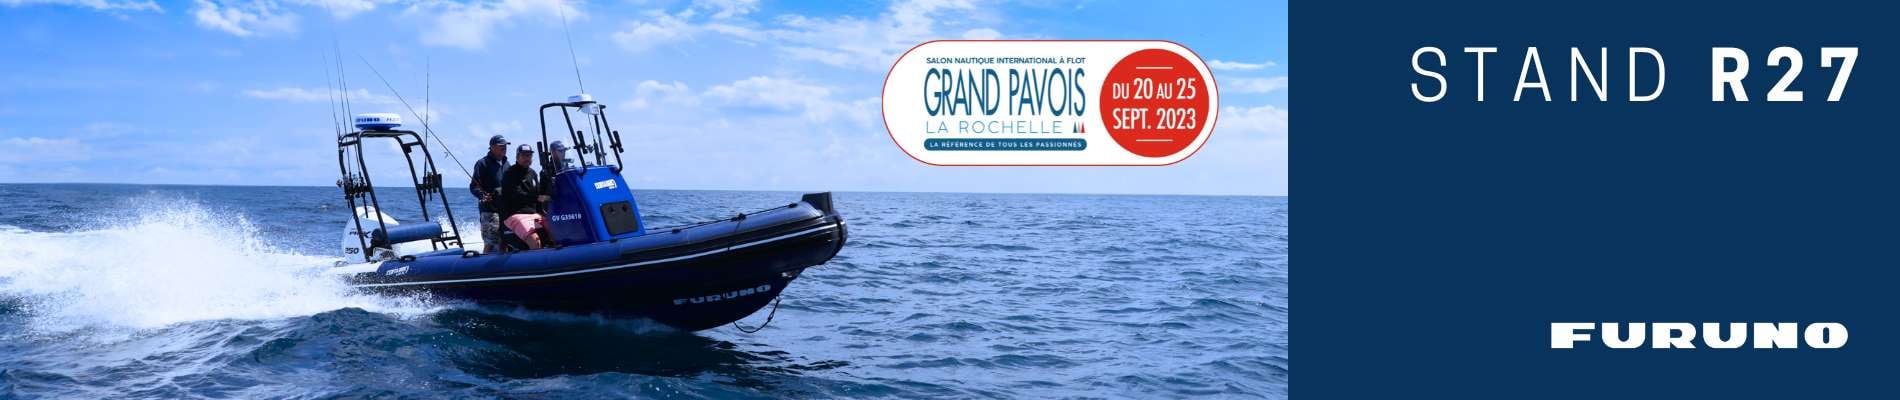 EVENTS BANNER GP2023 1900px